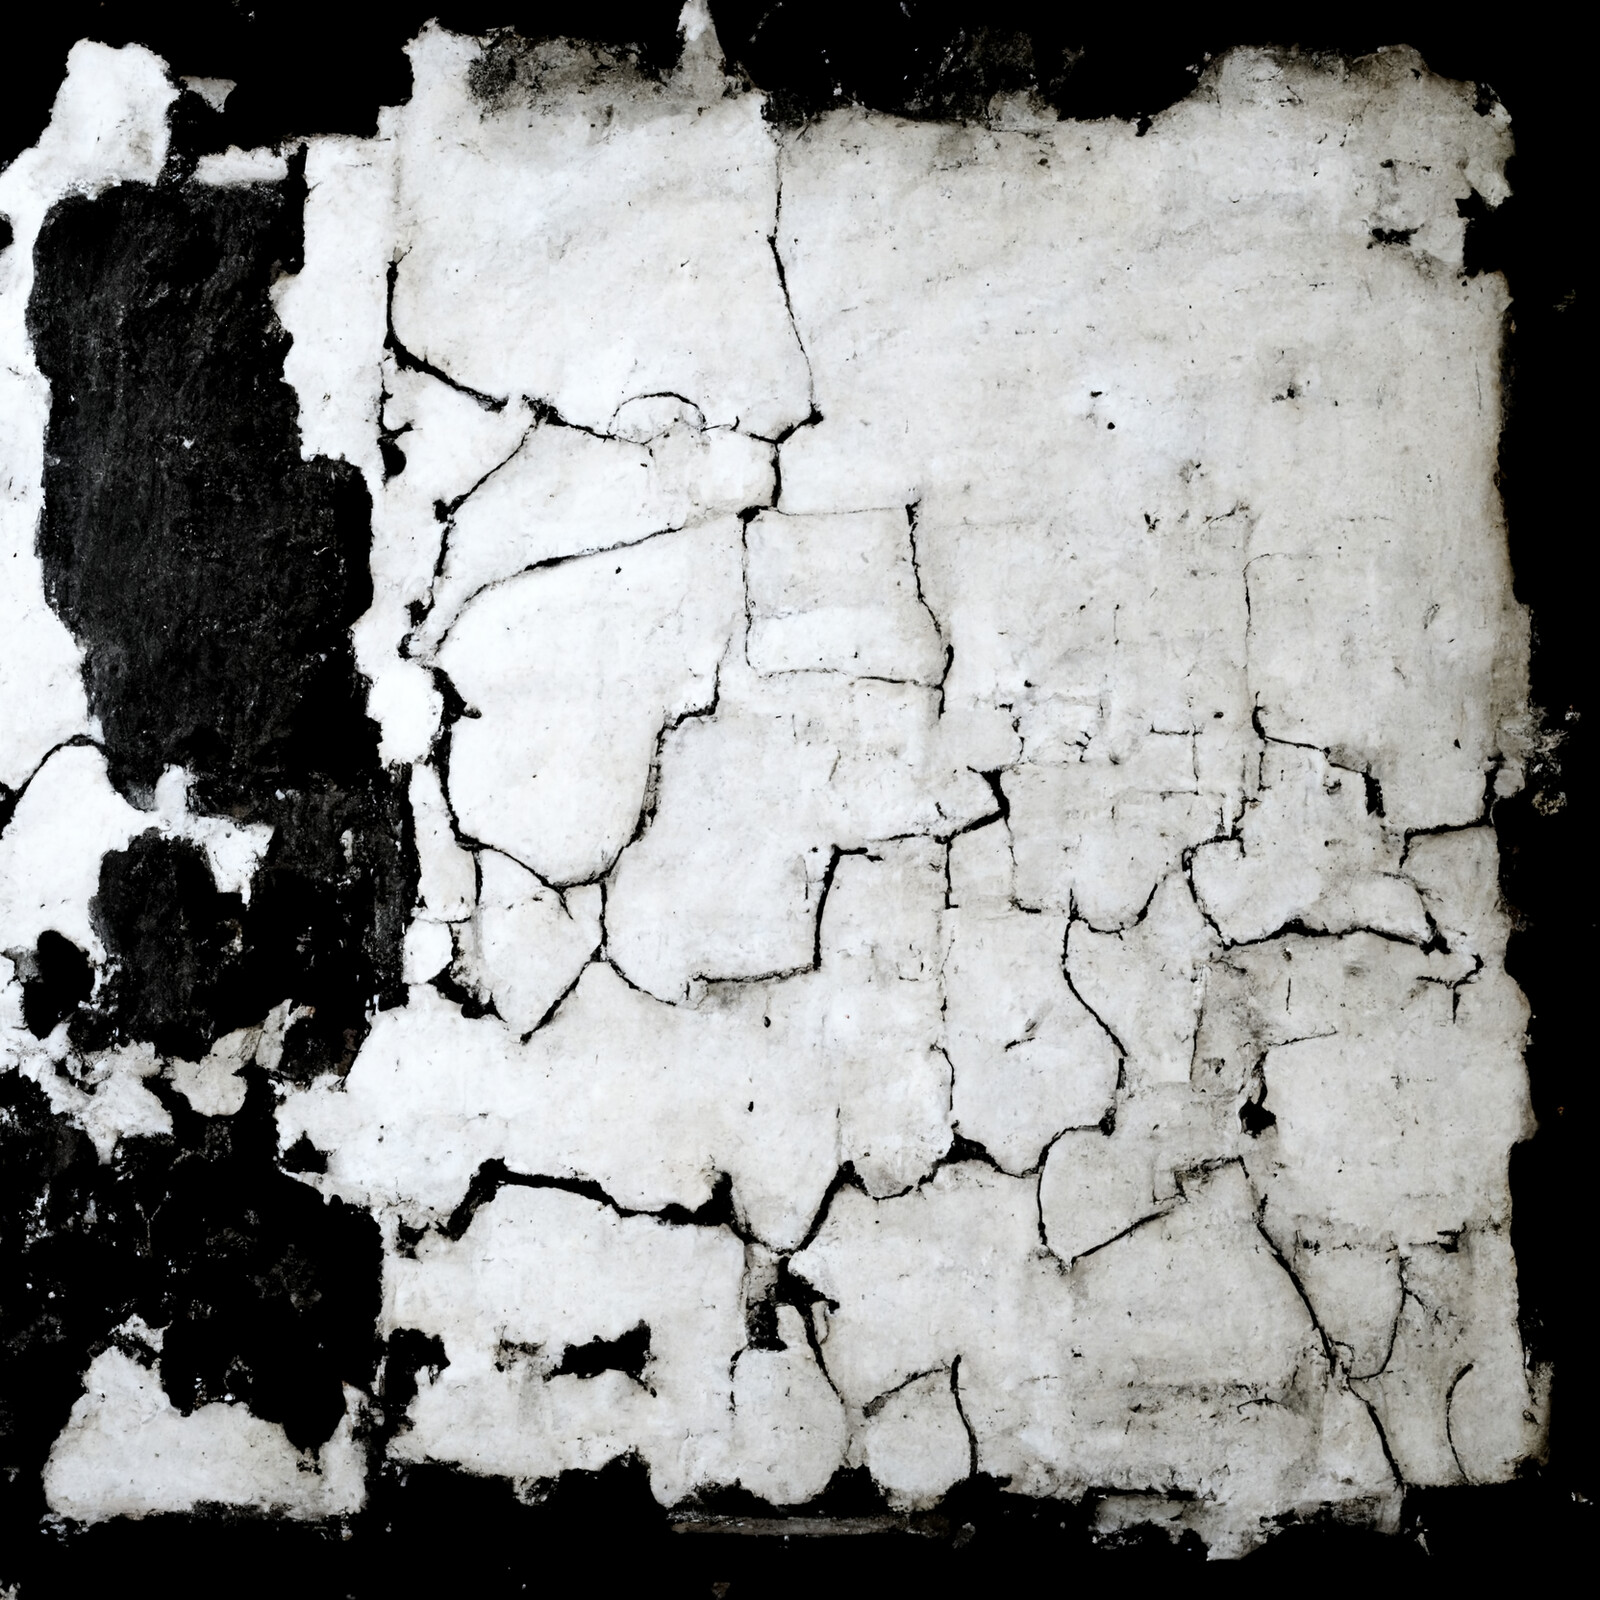 Grunge map creation test - raw outputs. Editing would be required to make tileable. (Prompt: "old worn plaster surface, black and white" )